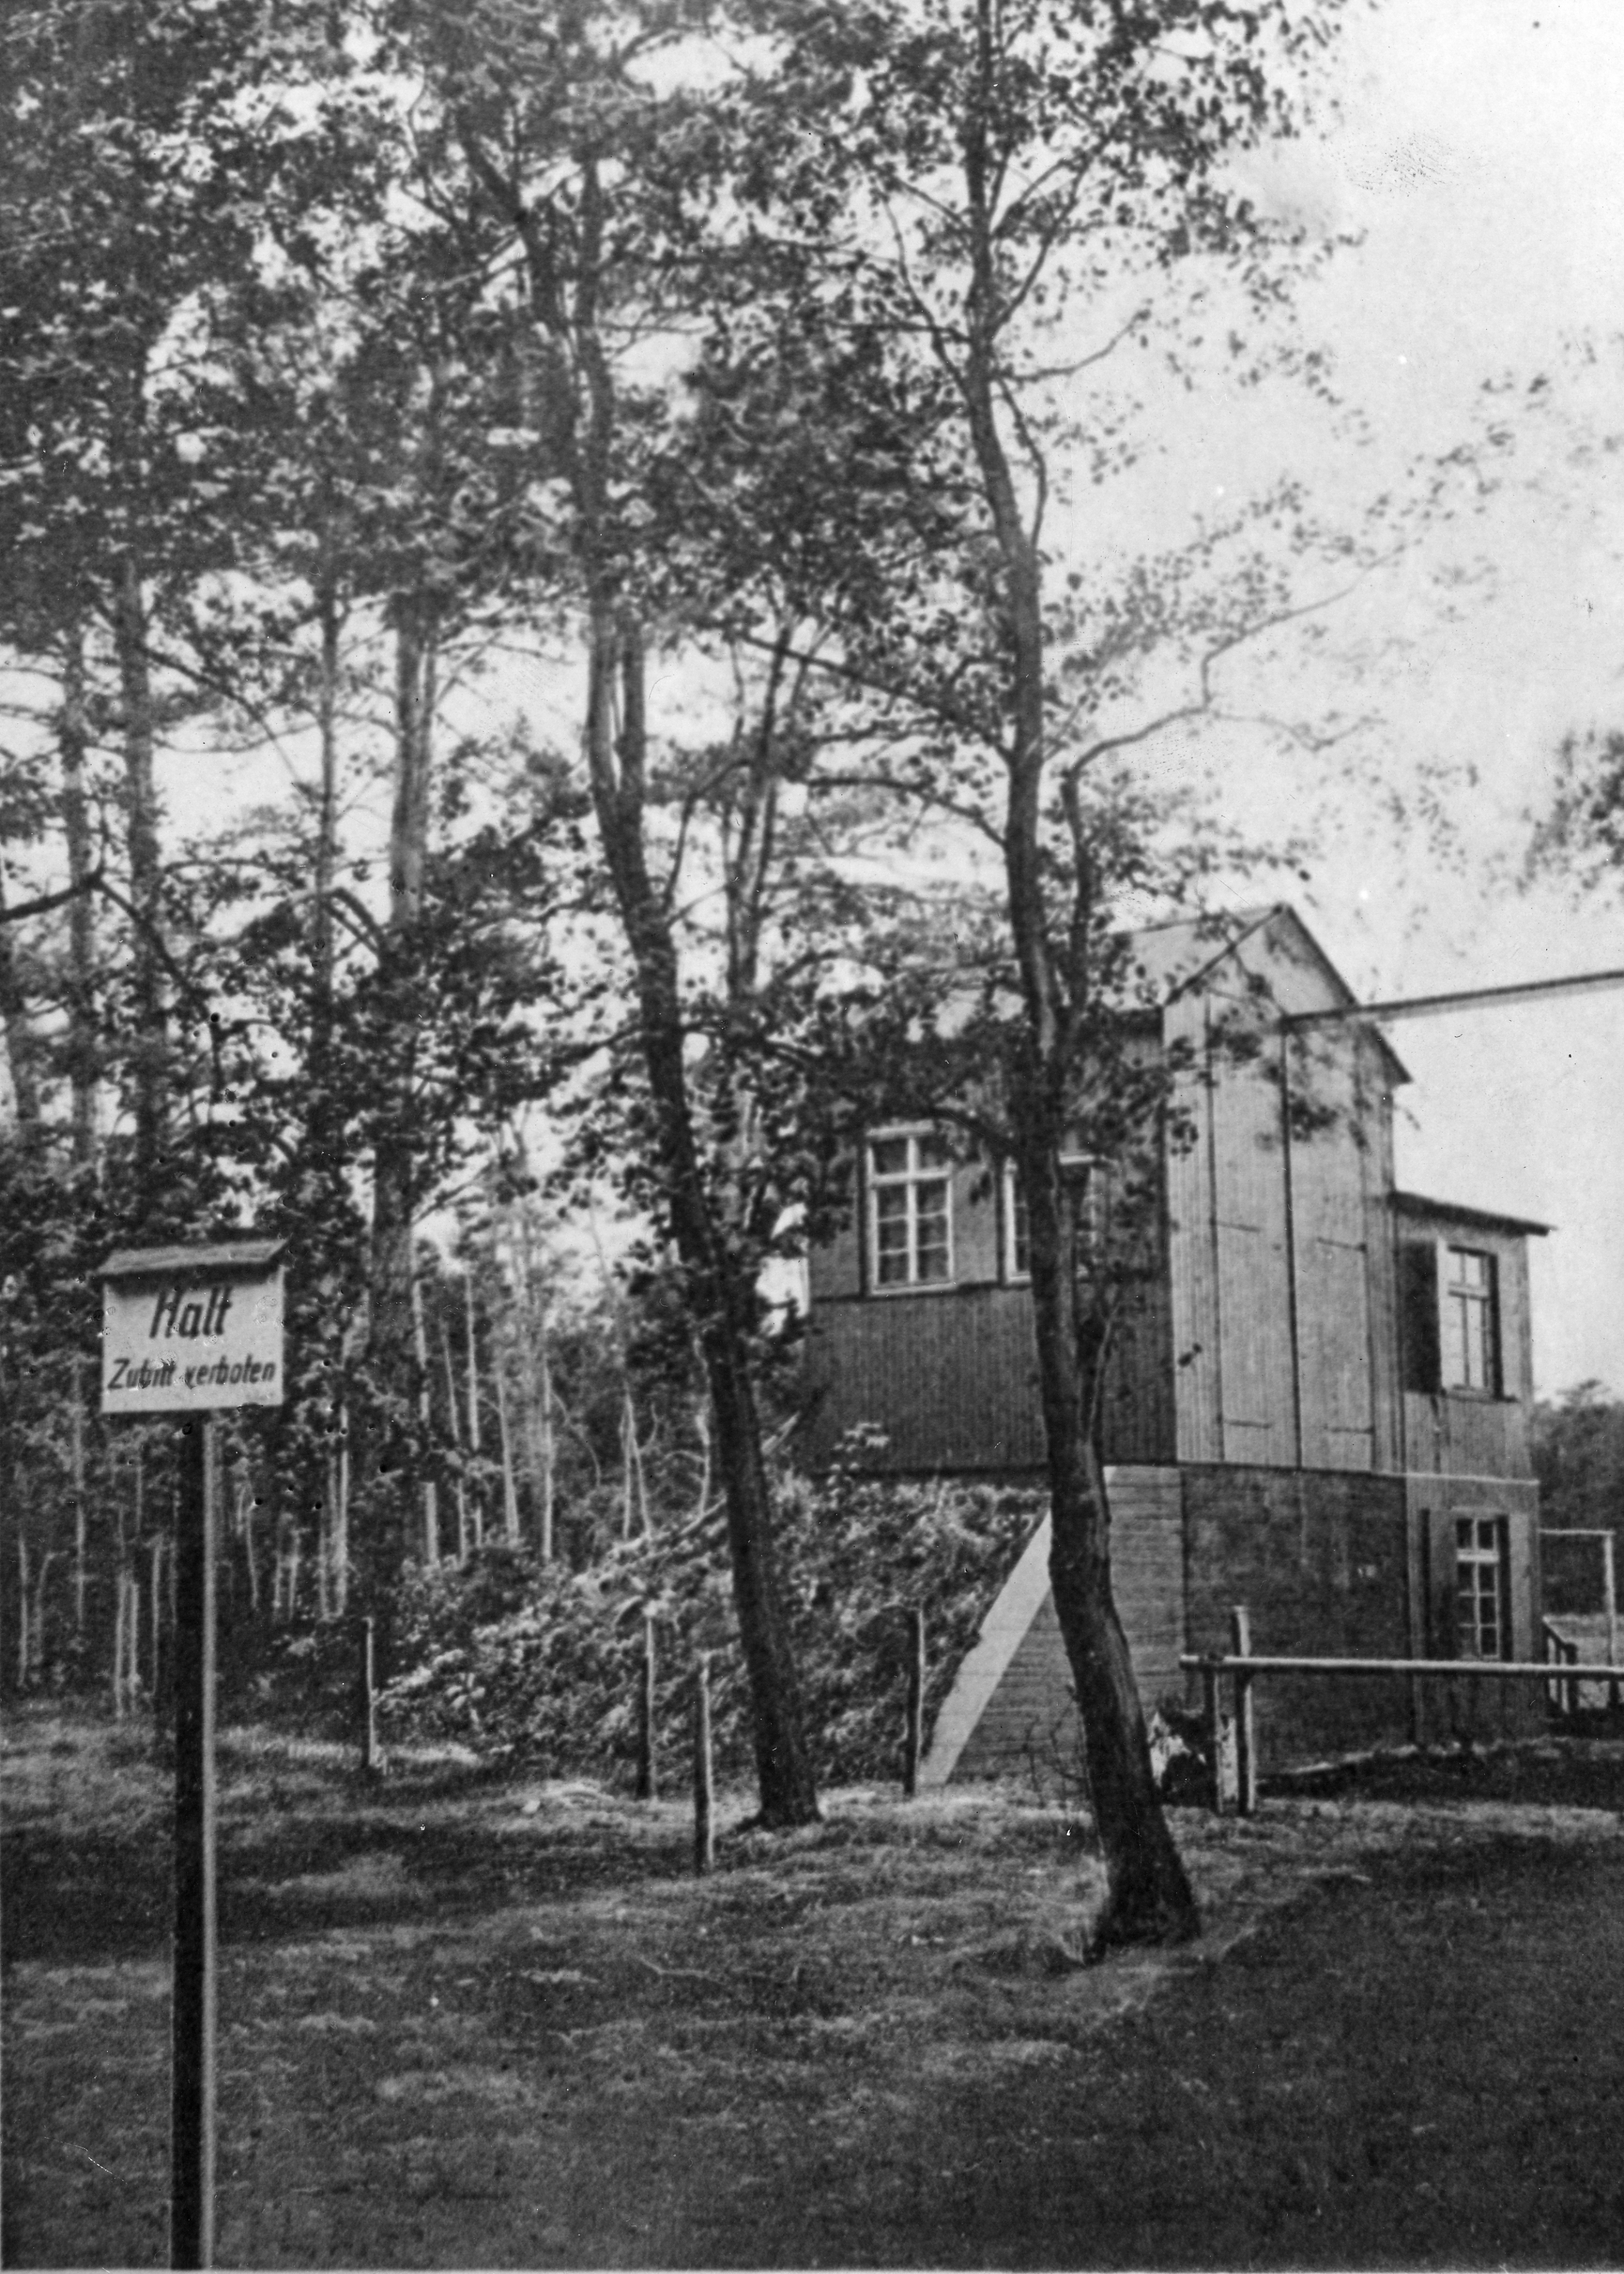 Building in a forest in background. Halt sign in foreground.